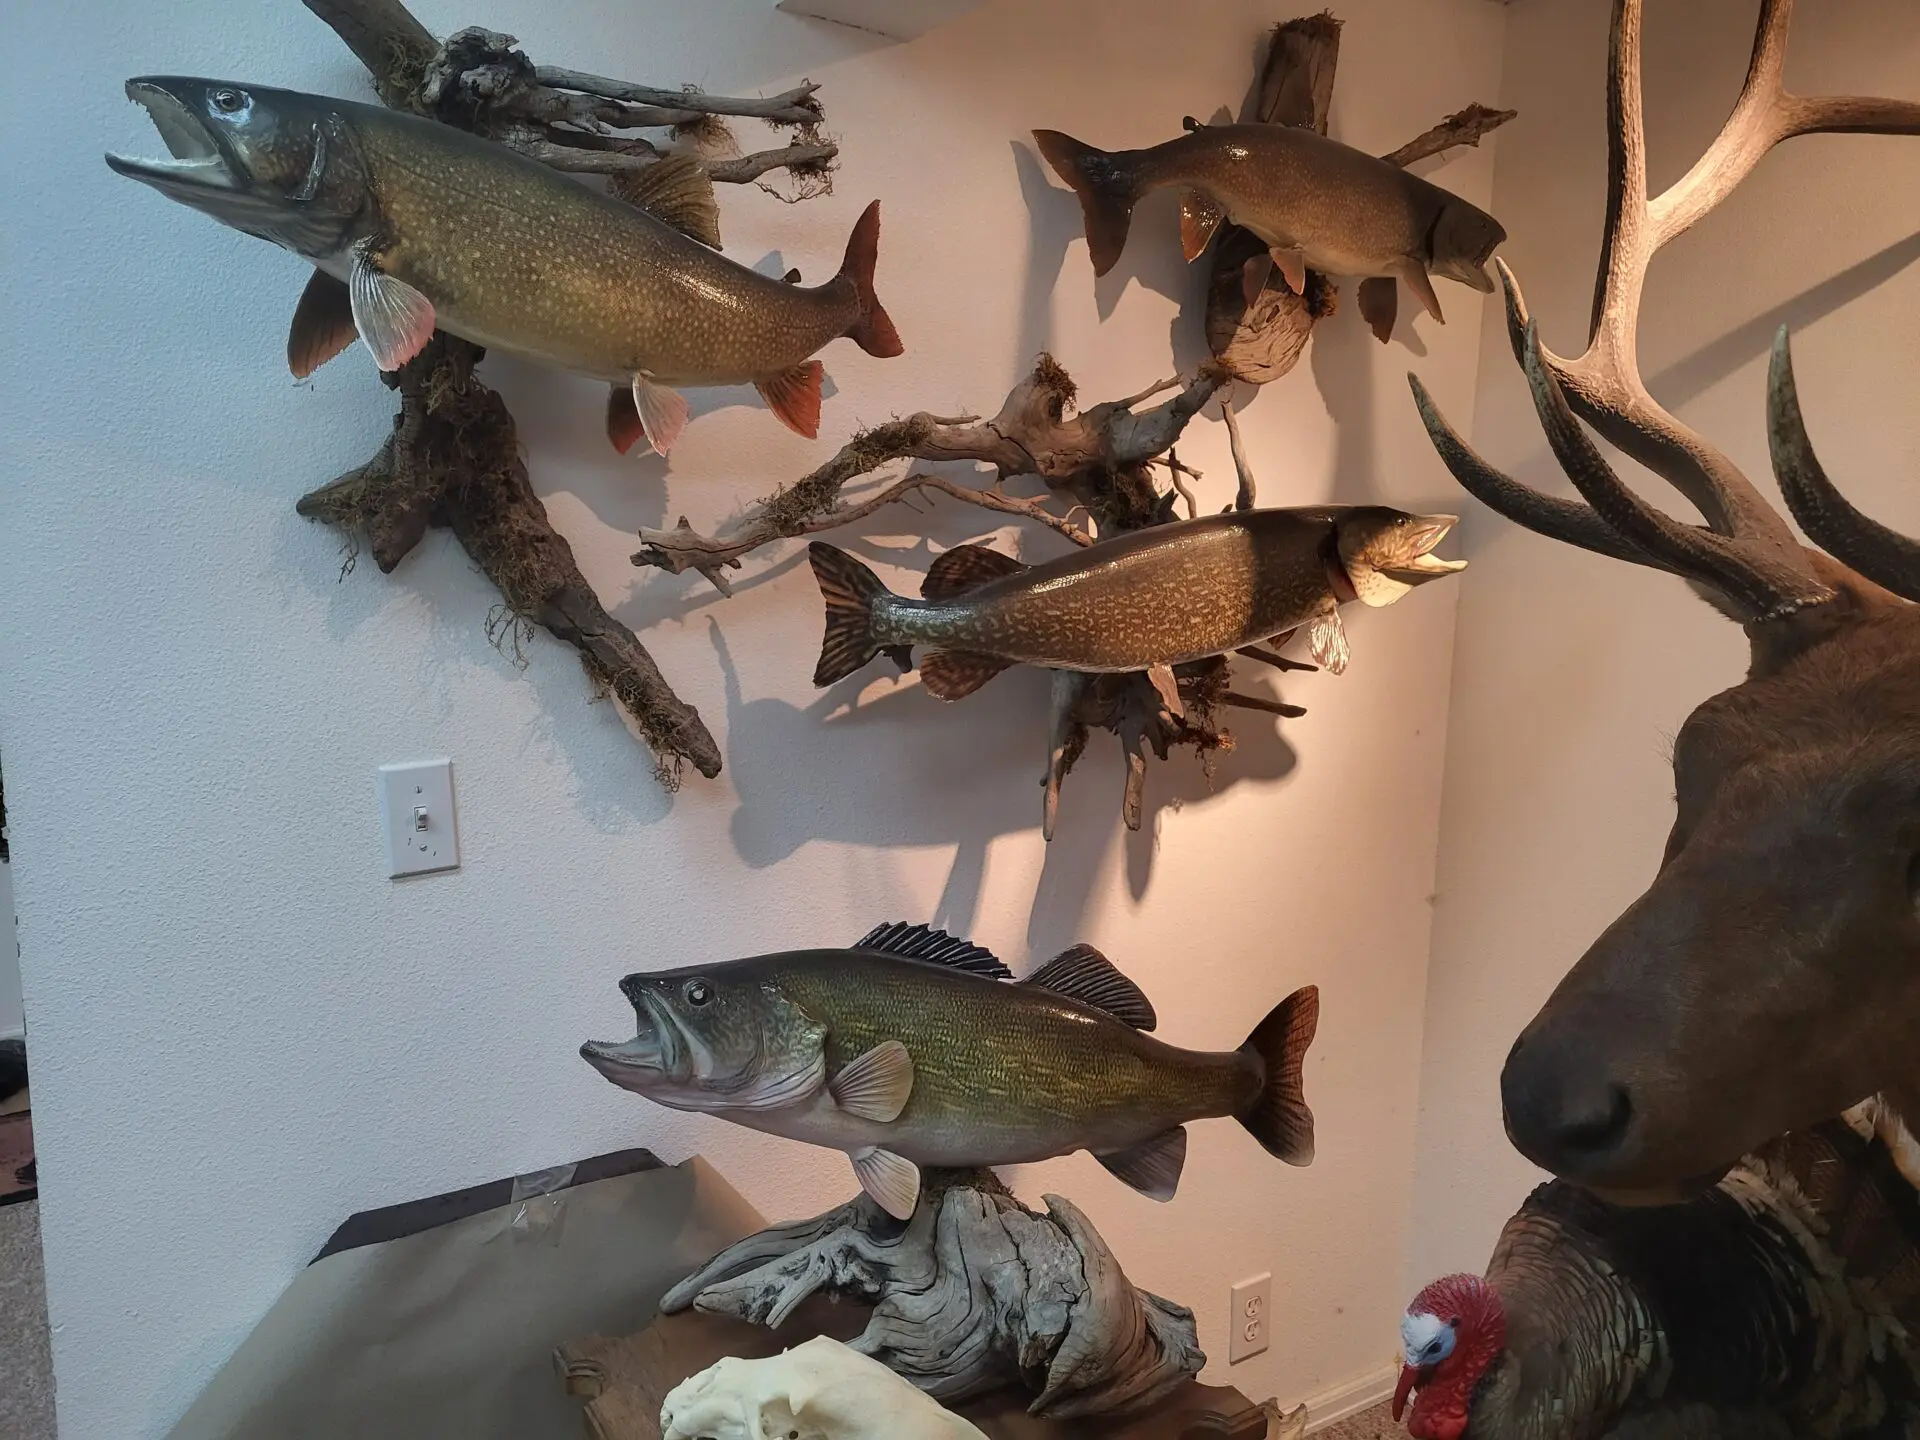 Huge collection of fish taxidermy at the gallery